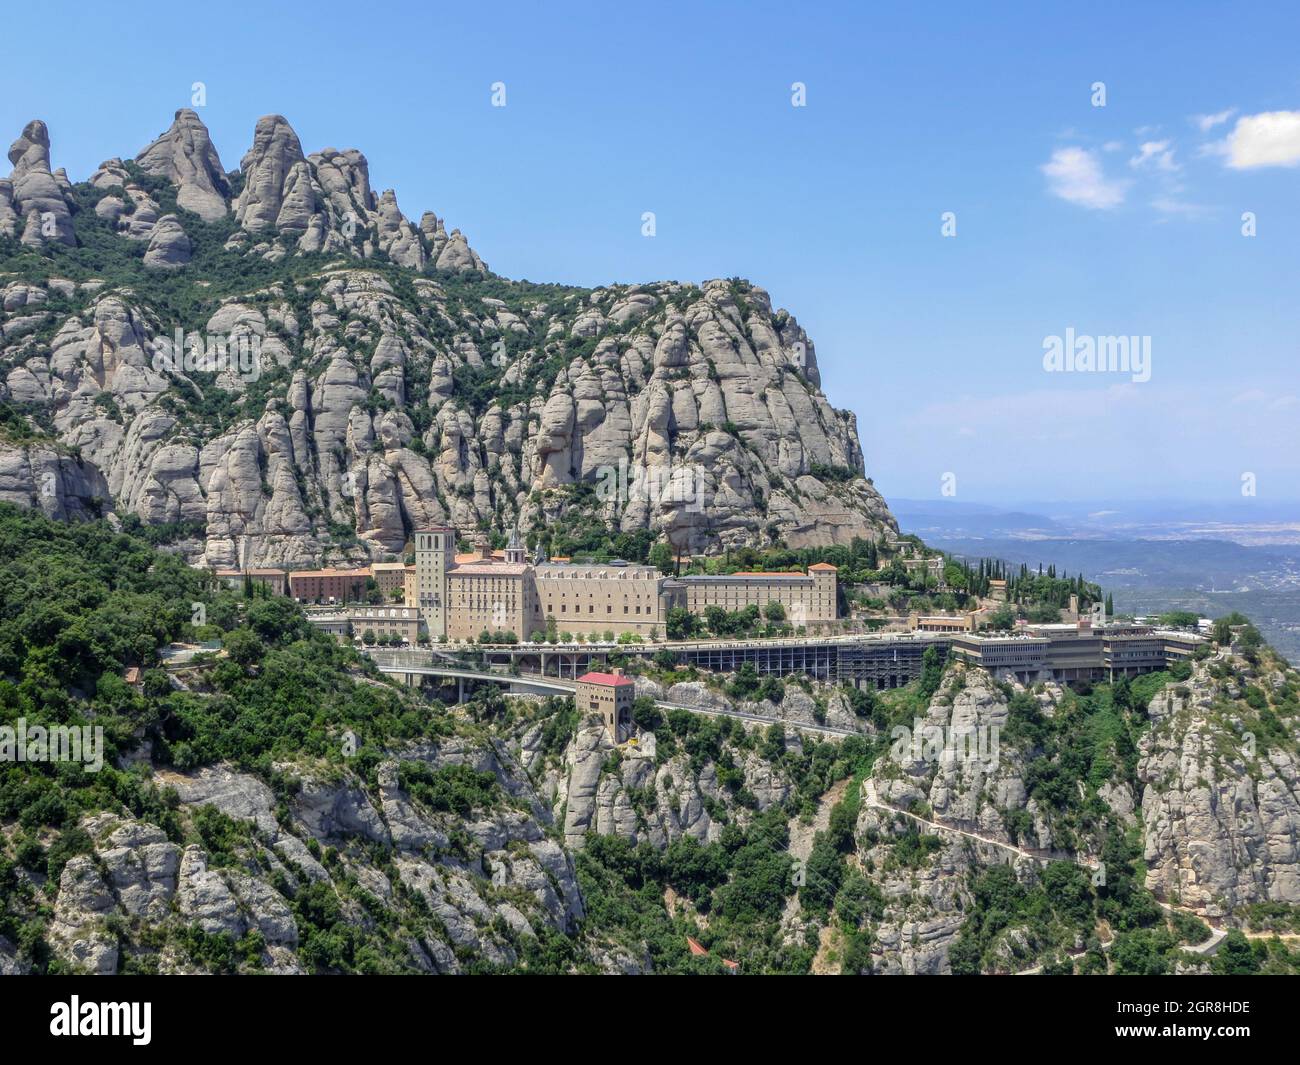 Georgous Monserrat Located At The Top Of The Mountain/plants Growing On Rock By Building Against Sky Stock Photo